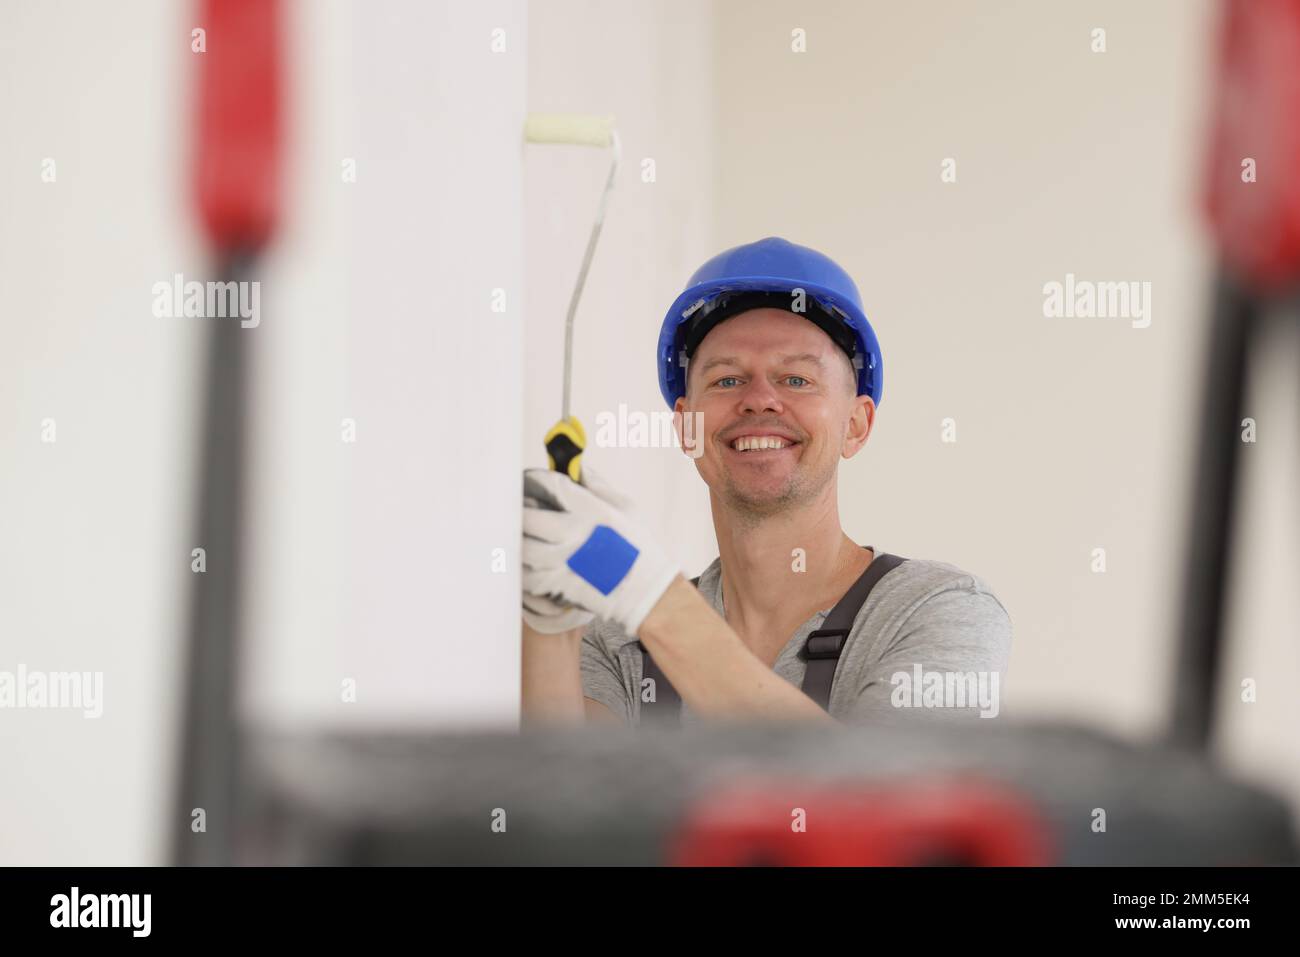 Happy painter in hard hat paints wall with white paint and looks at camera. Stock Photo